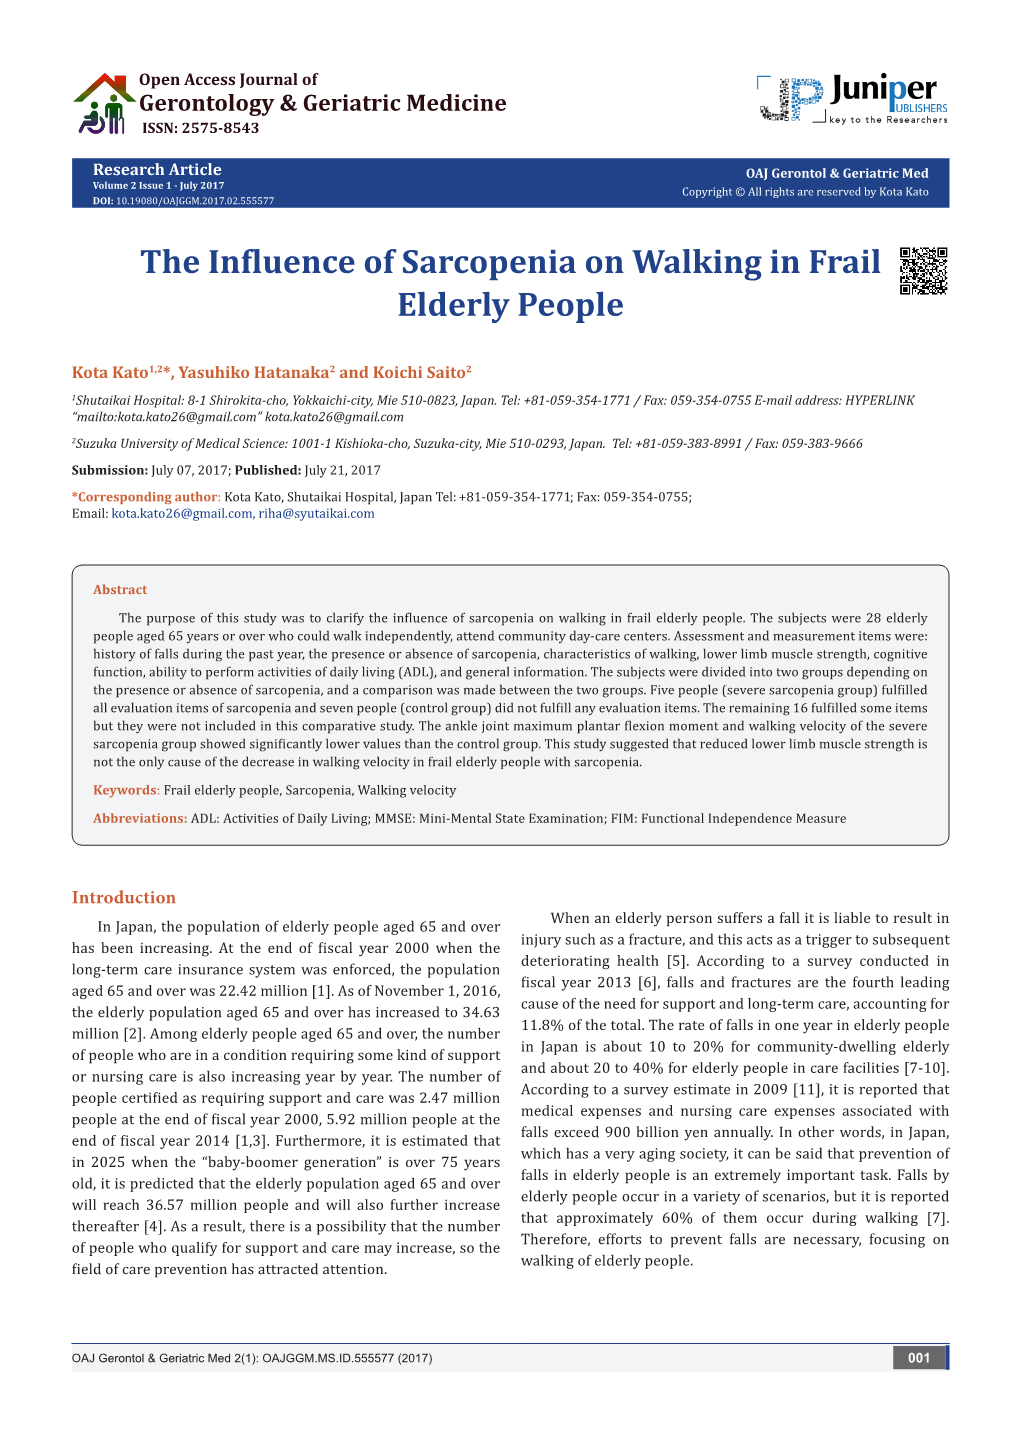 The Influence of Sarcopenia on Walking in Frail Elderly People